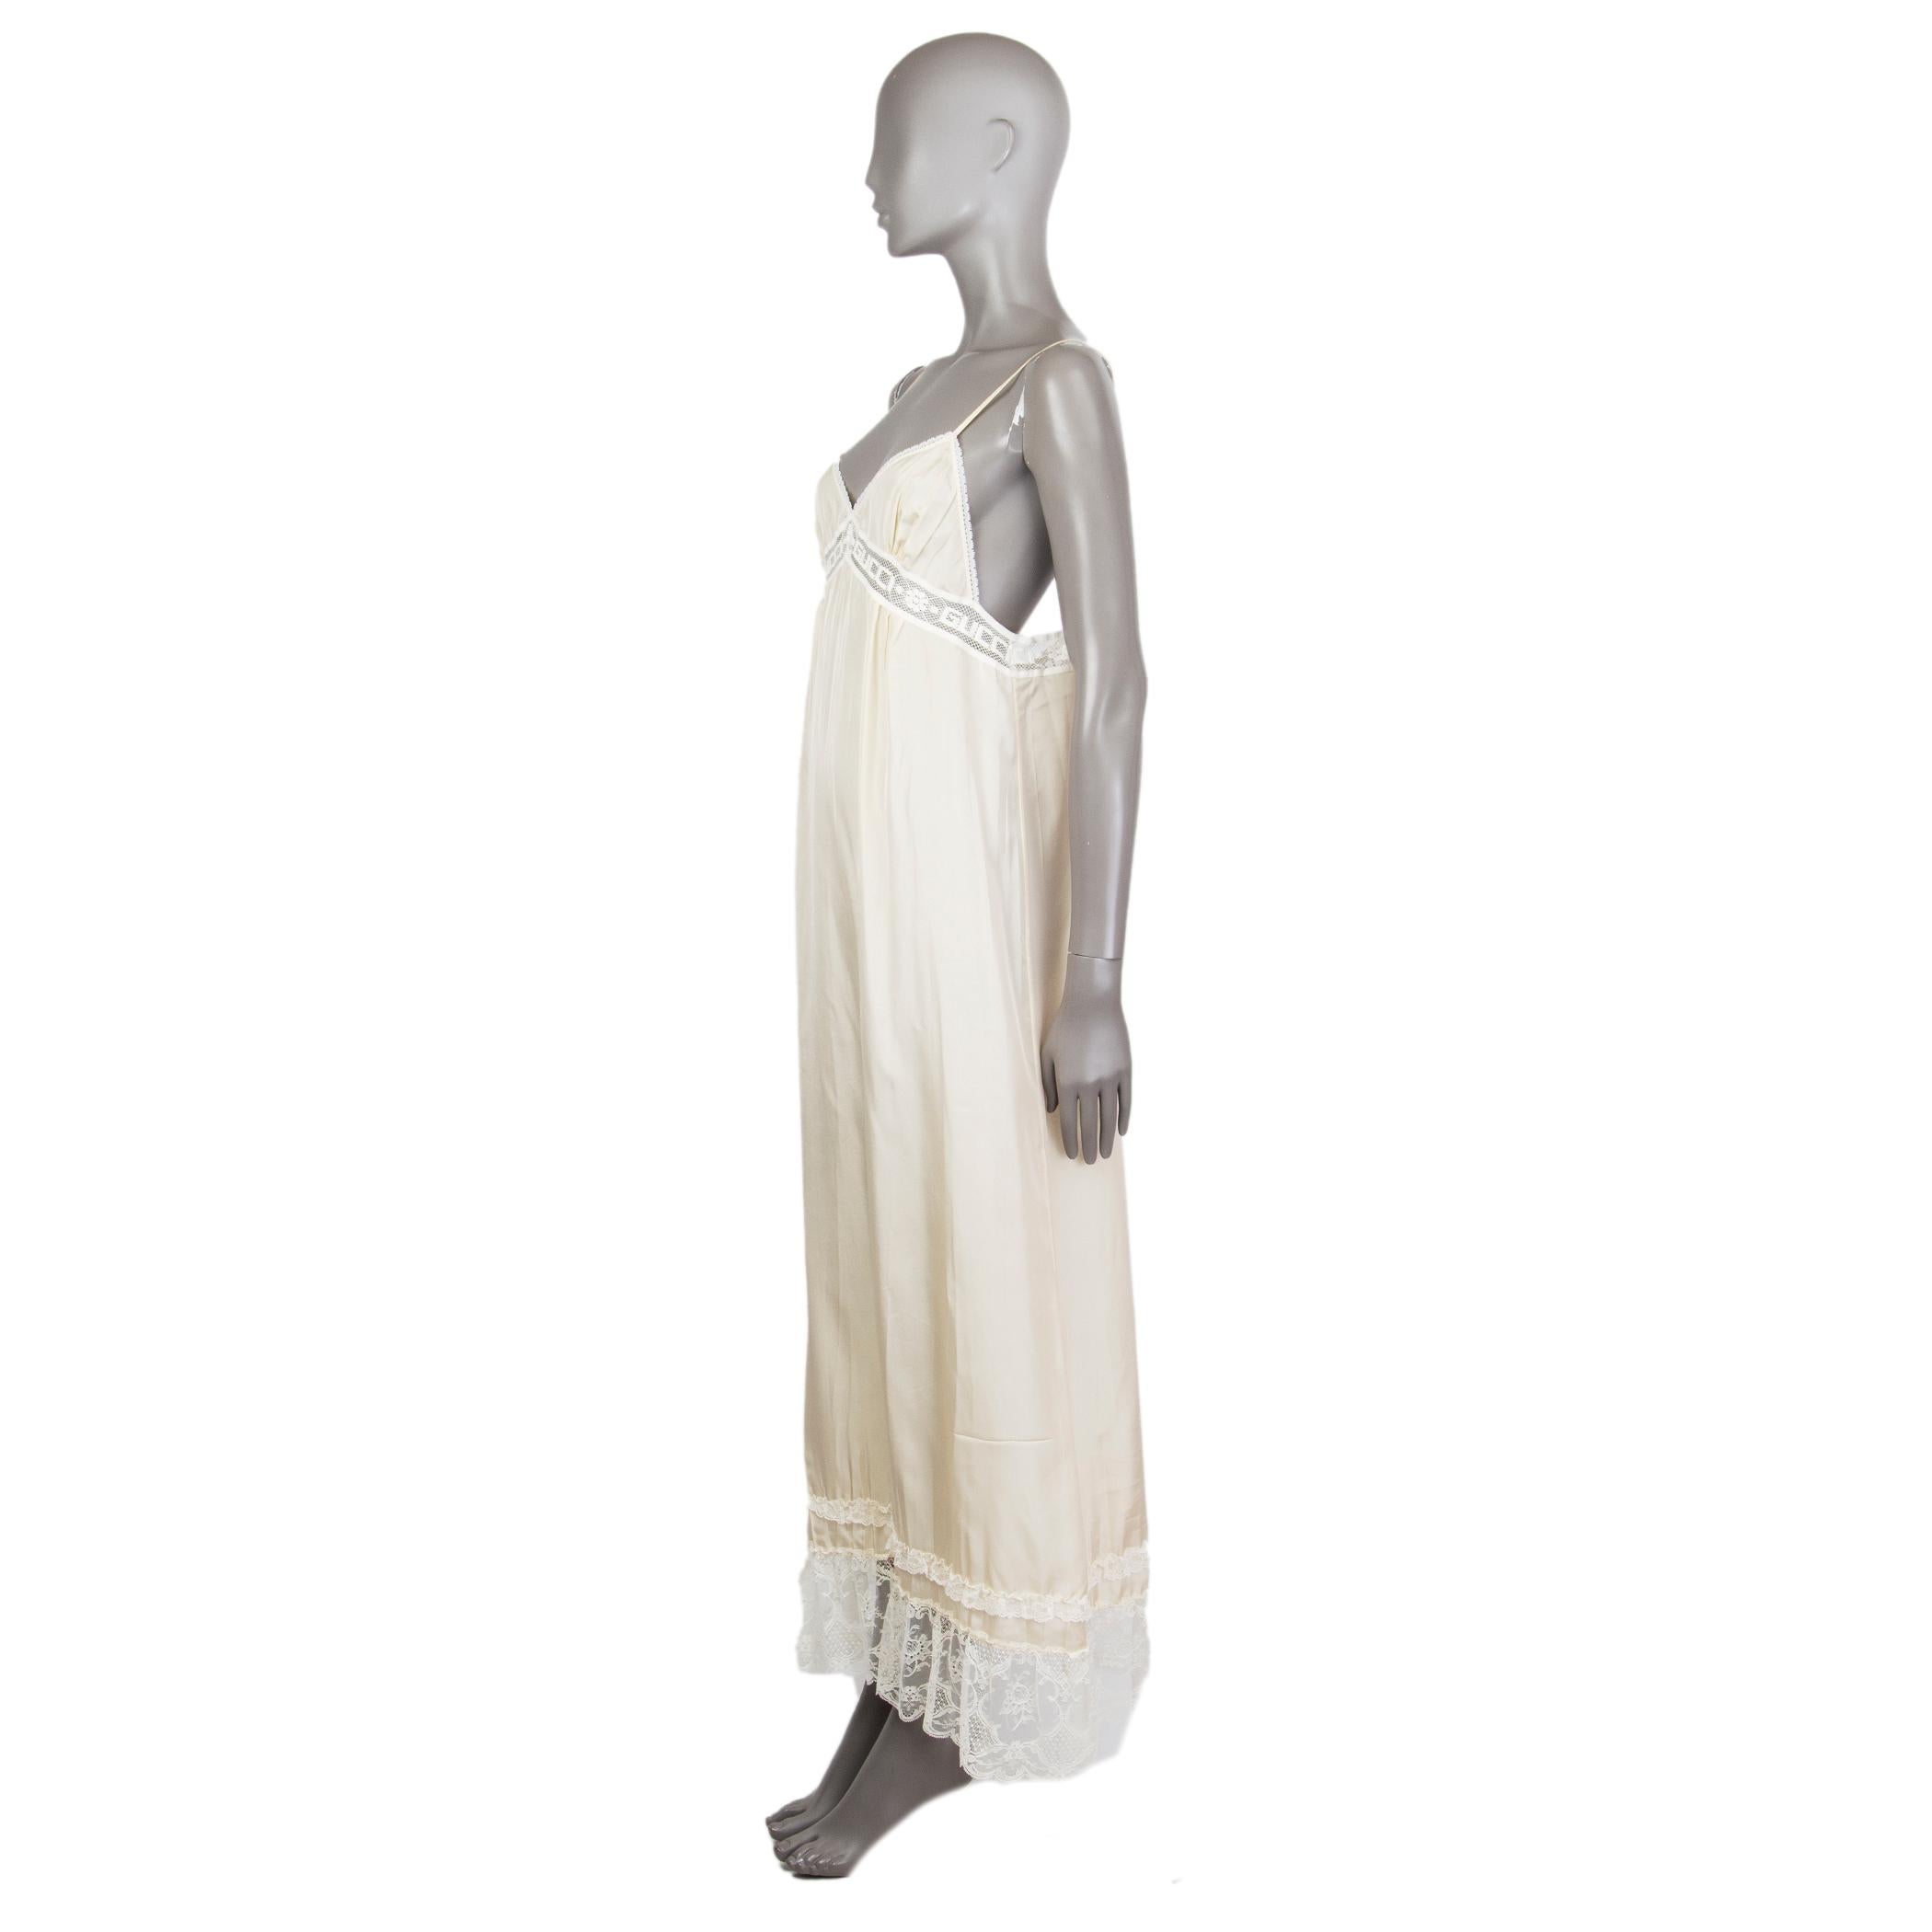 Gucci sleeveless slip dress in cream silk (assumed as tag is missing) with lace trim. Unlined. Has been worn and in excellent condition. 

Tag Size 40
Size S
Shoulder Width 34cm (13.3in)
Bust From 46cm (17.9in)
Waist From 51cm (19.9in)
Hips From